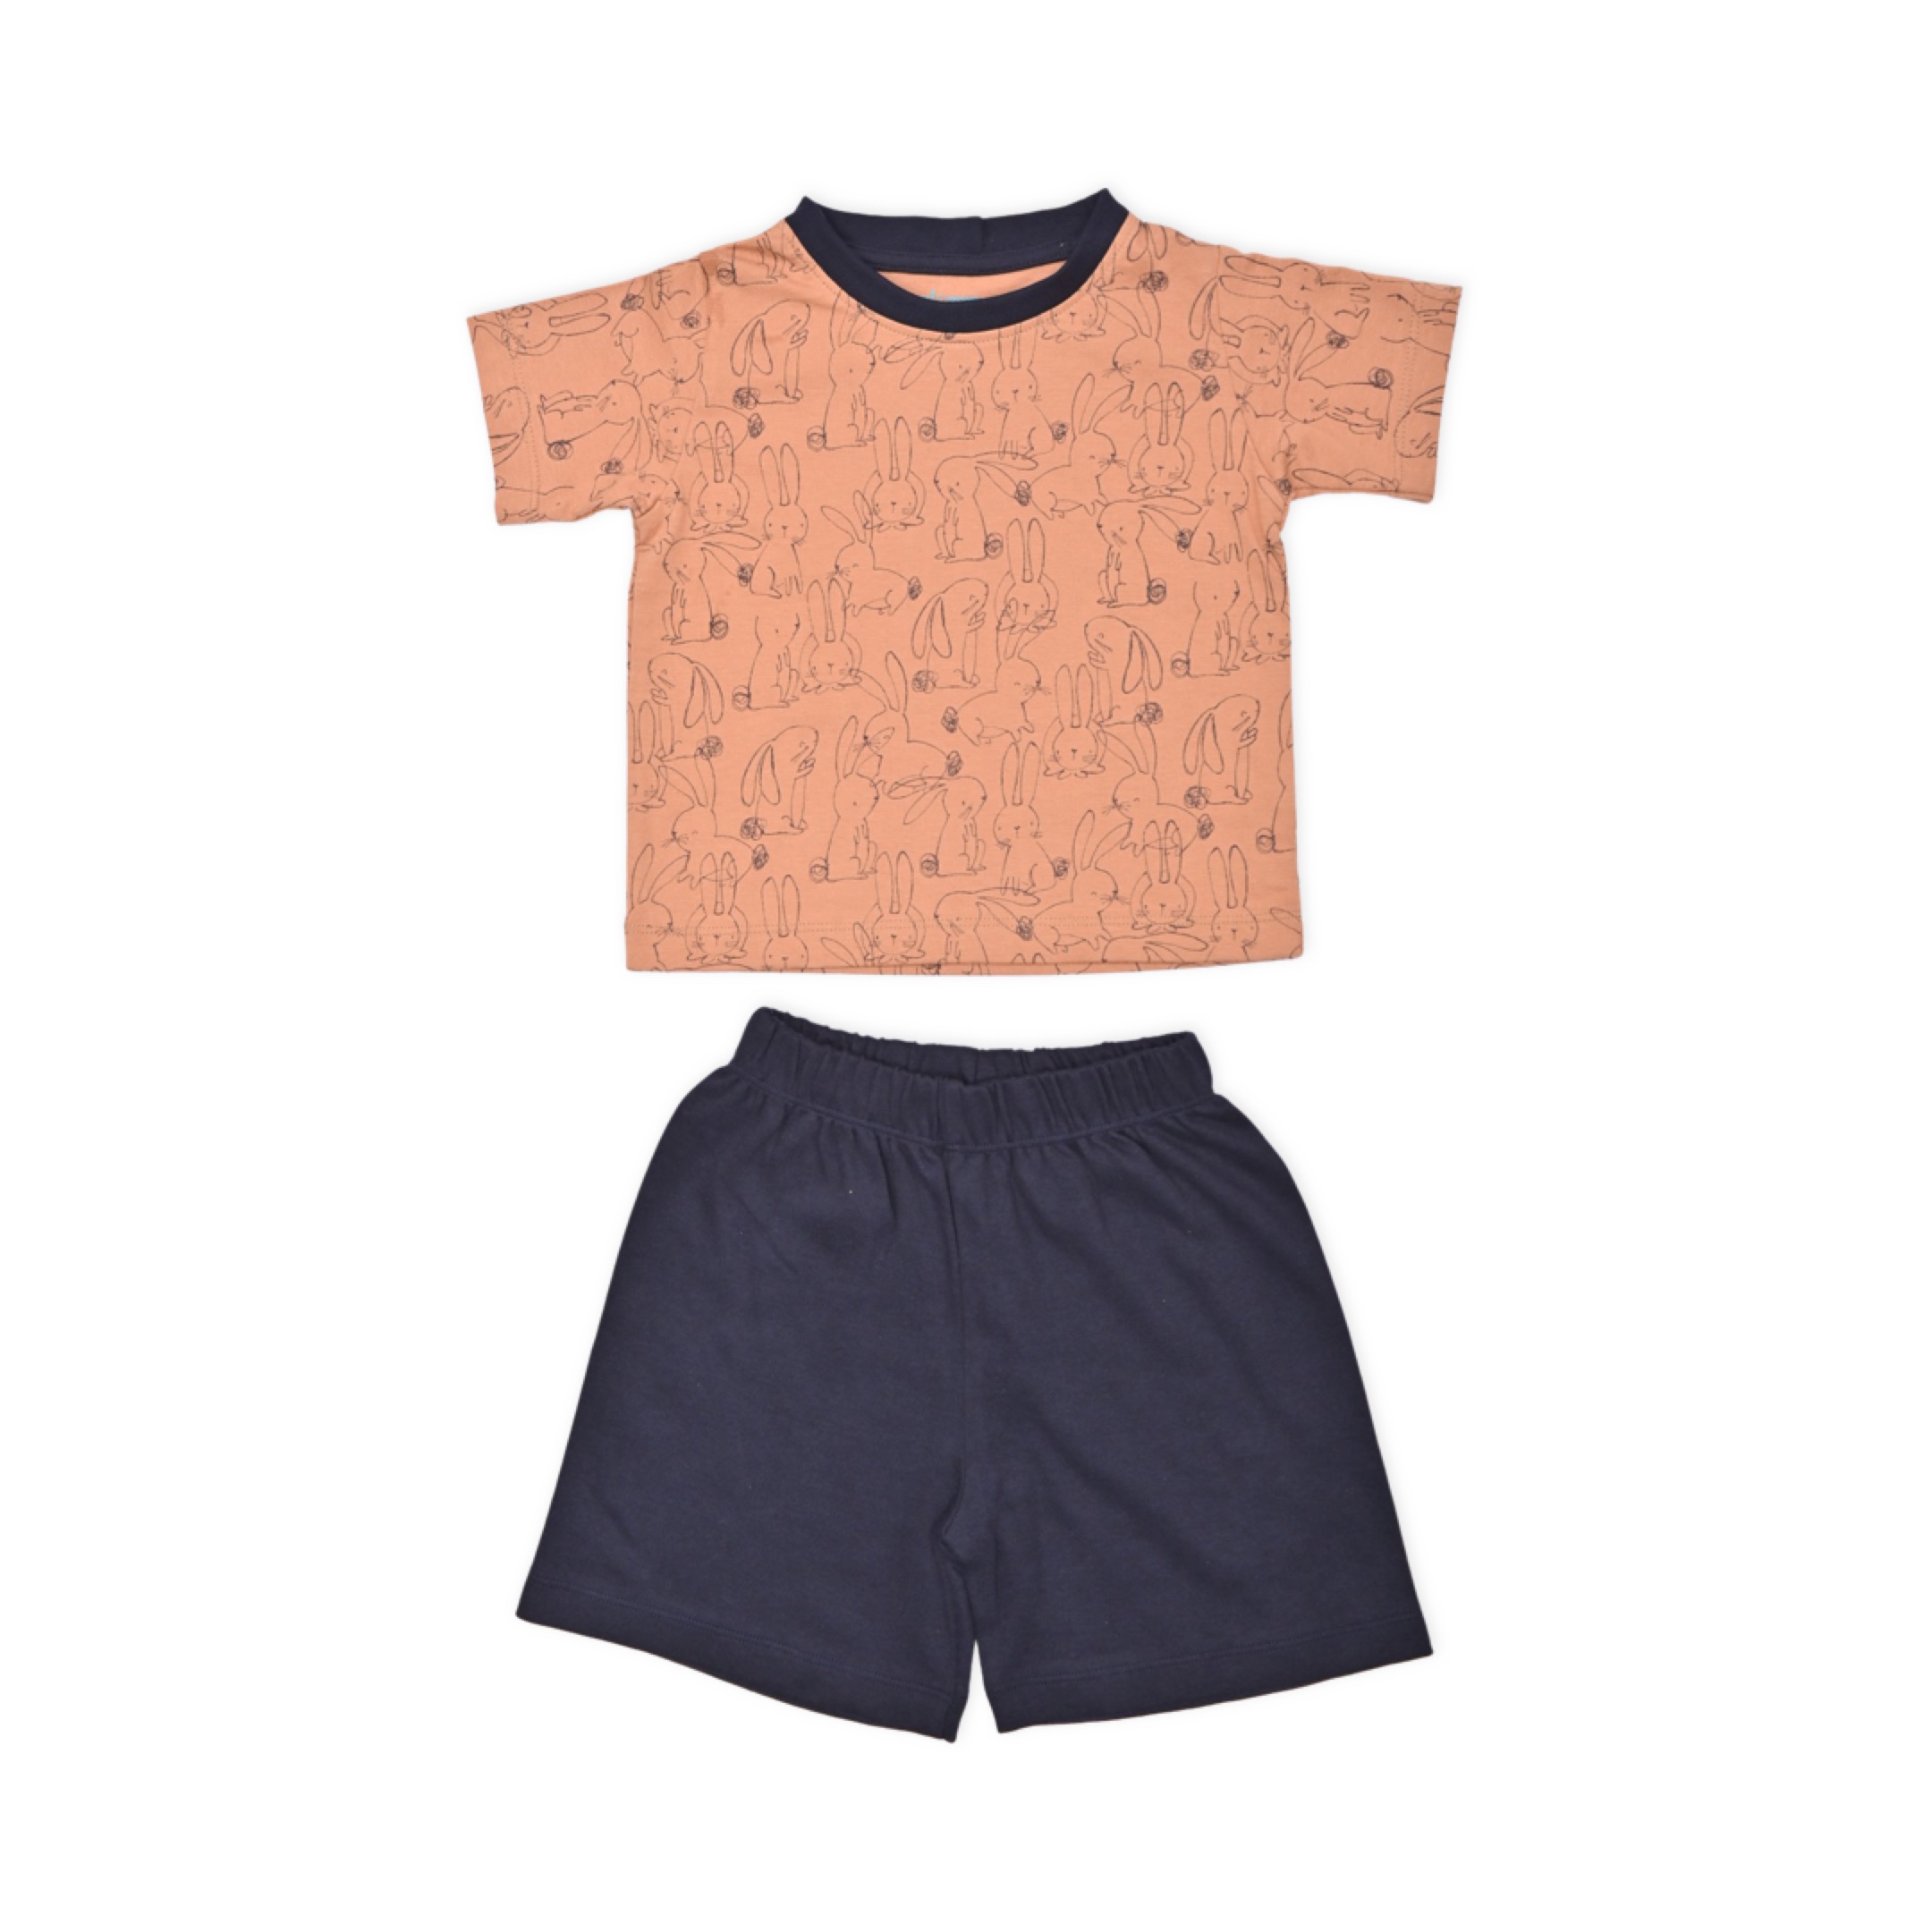 Zoul & Zera contrast piping round Neck with rabbit print Casual Tees for Boys